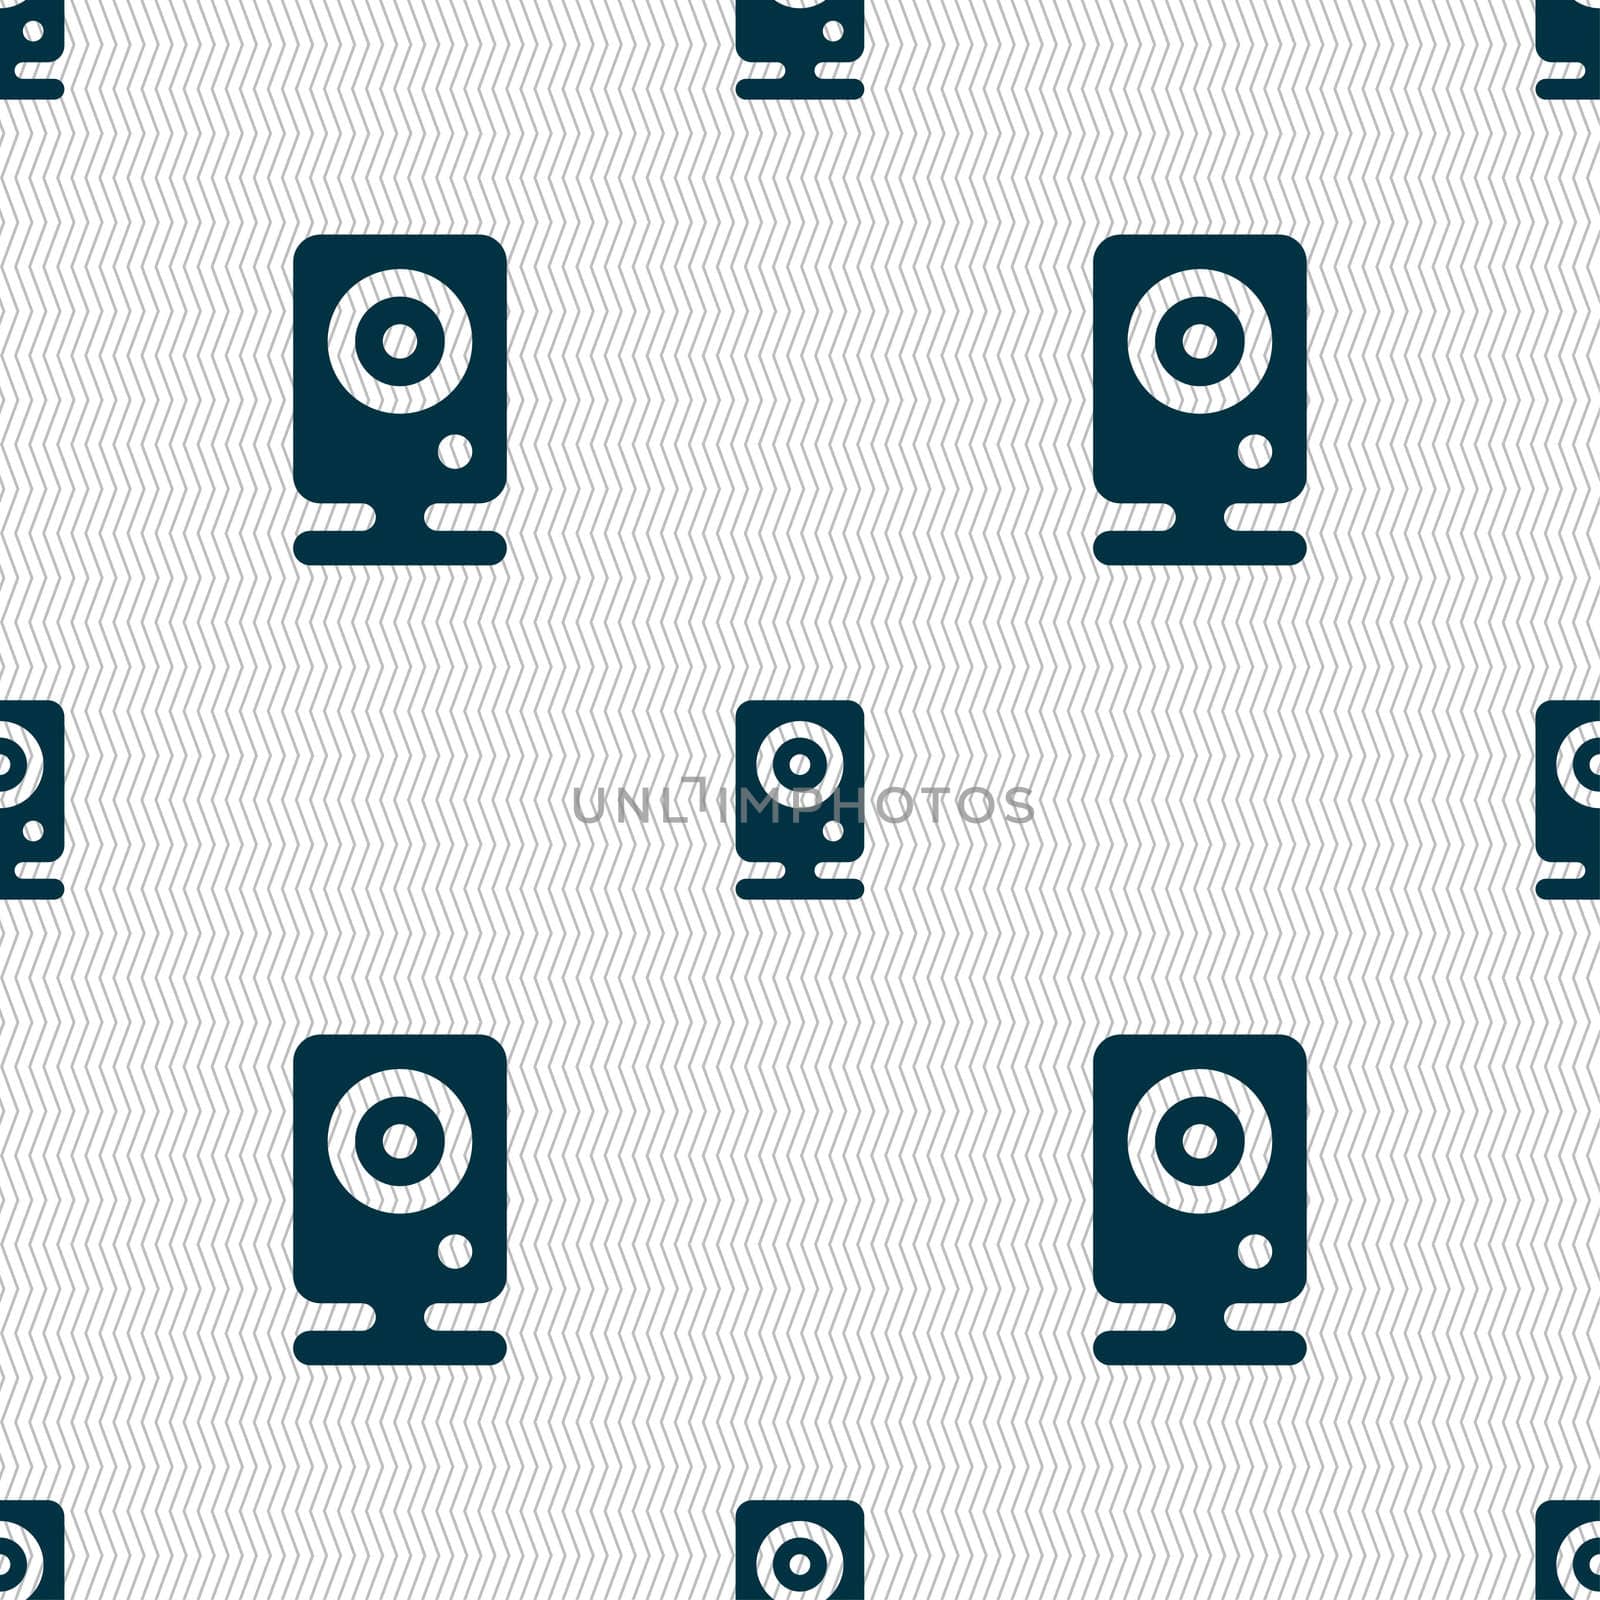 Web cam icon sign. Seamless pattern with geometric texture. illustration